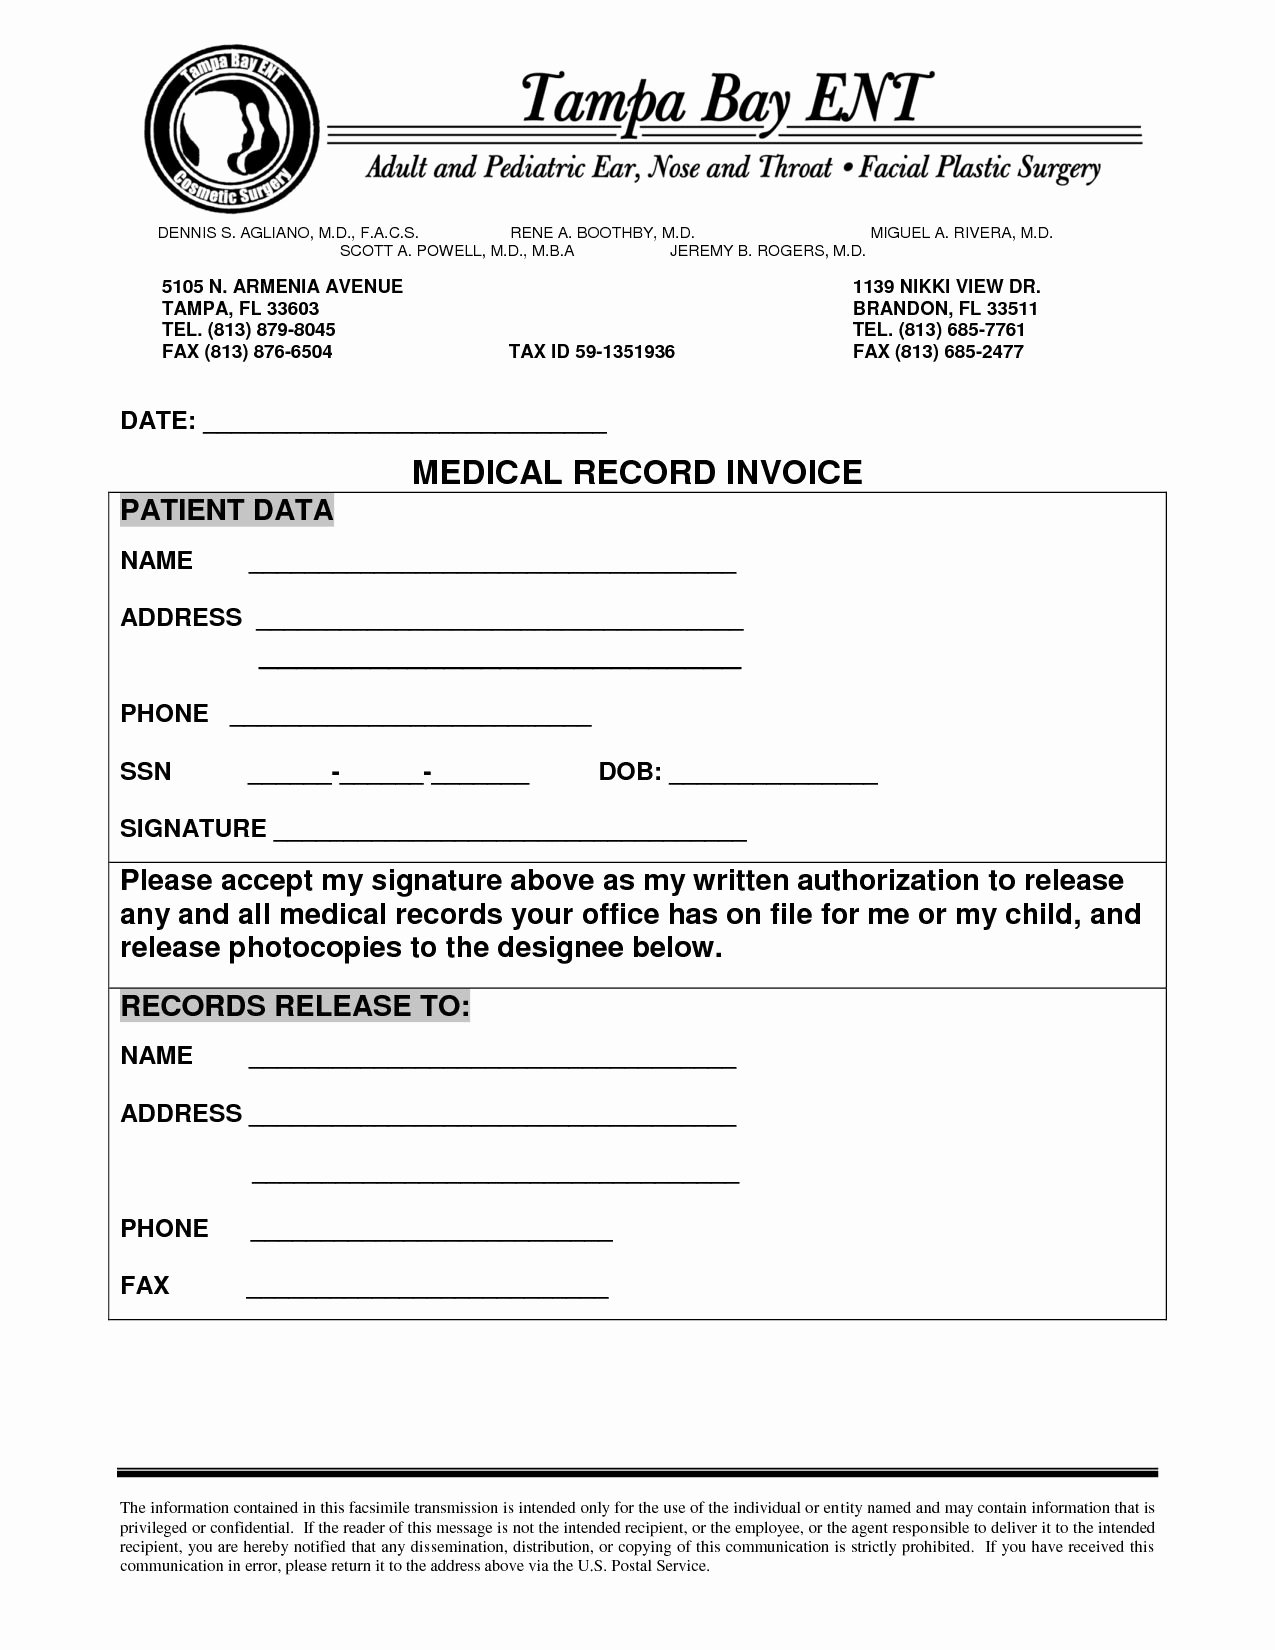 Medical Record Request Template Luxury Interpreter Resume Medical Records Invoice Sample